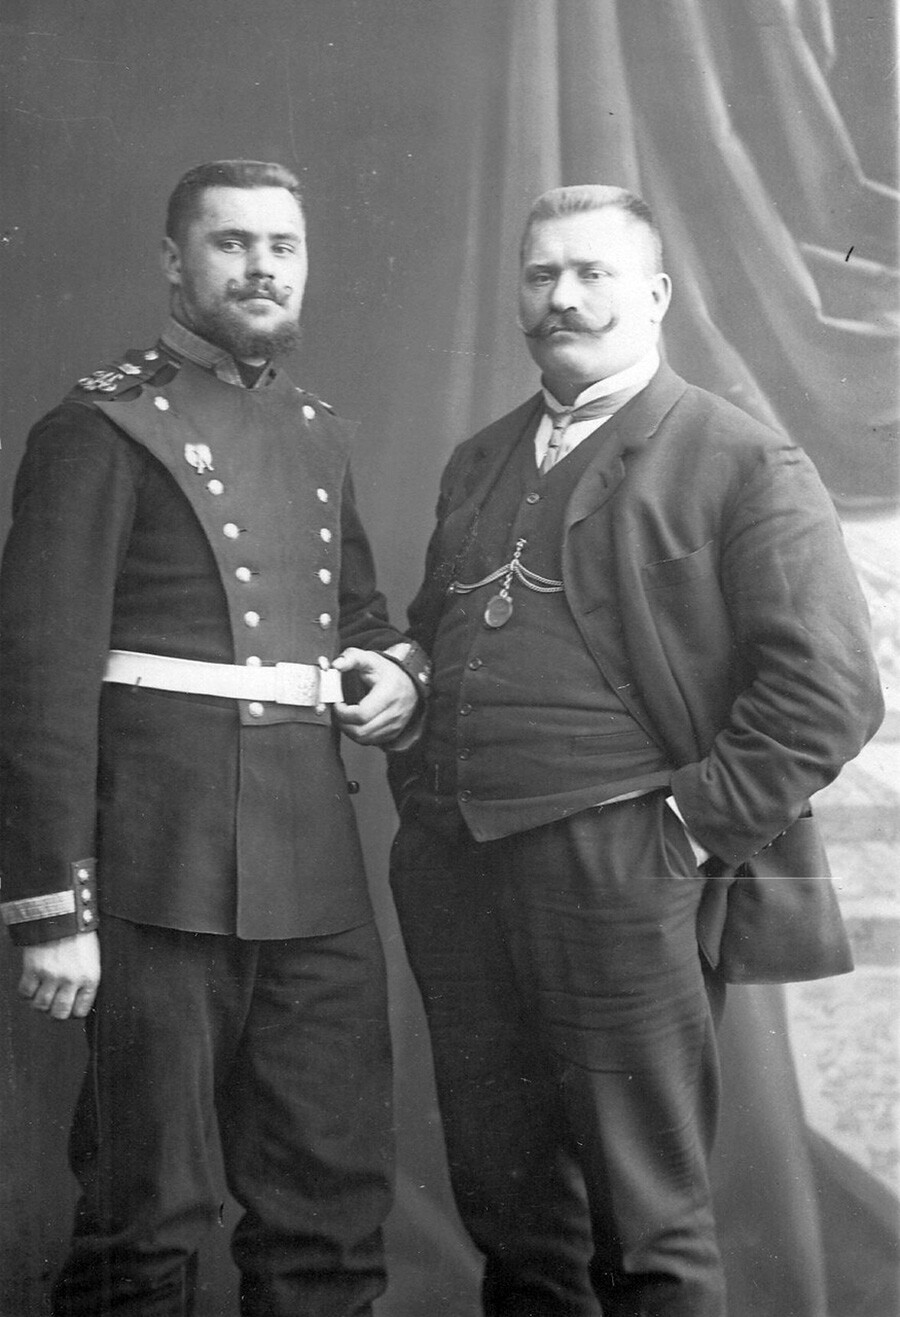 Ivan Poddubny (R) with one of his younger brothers